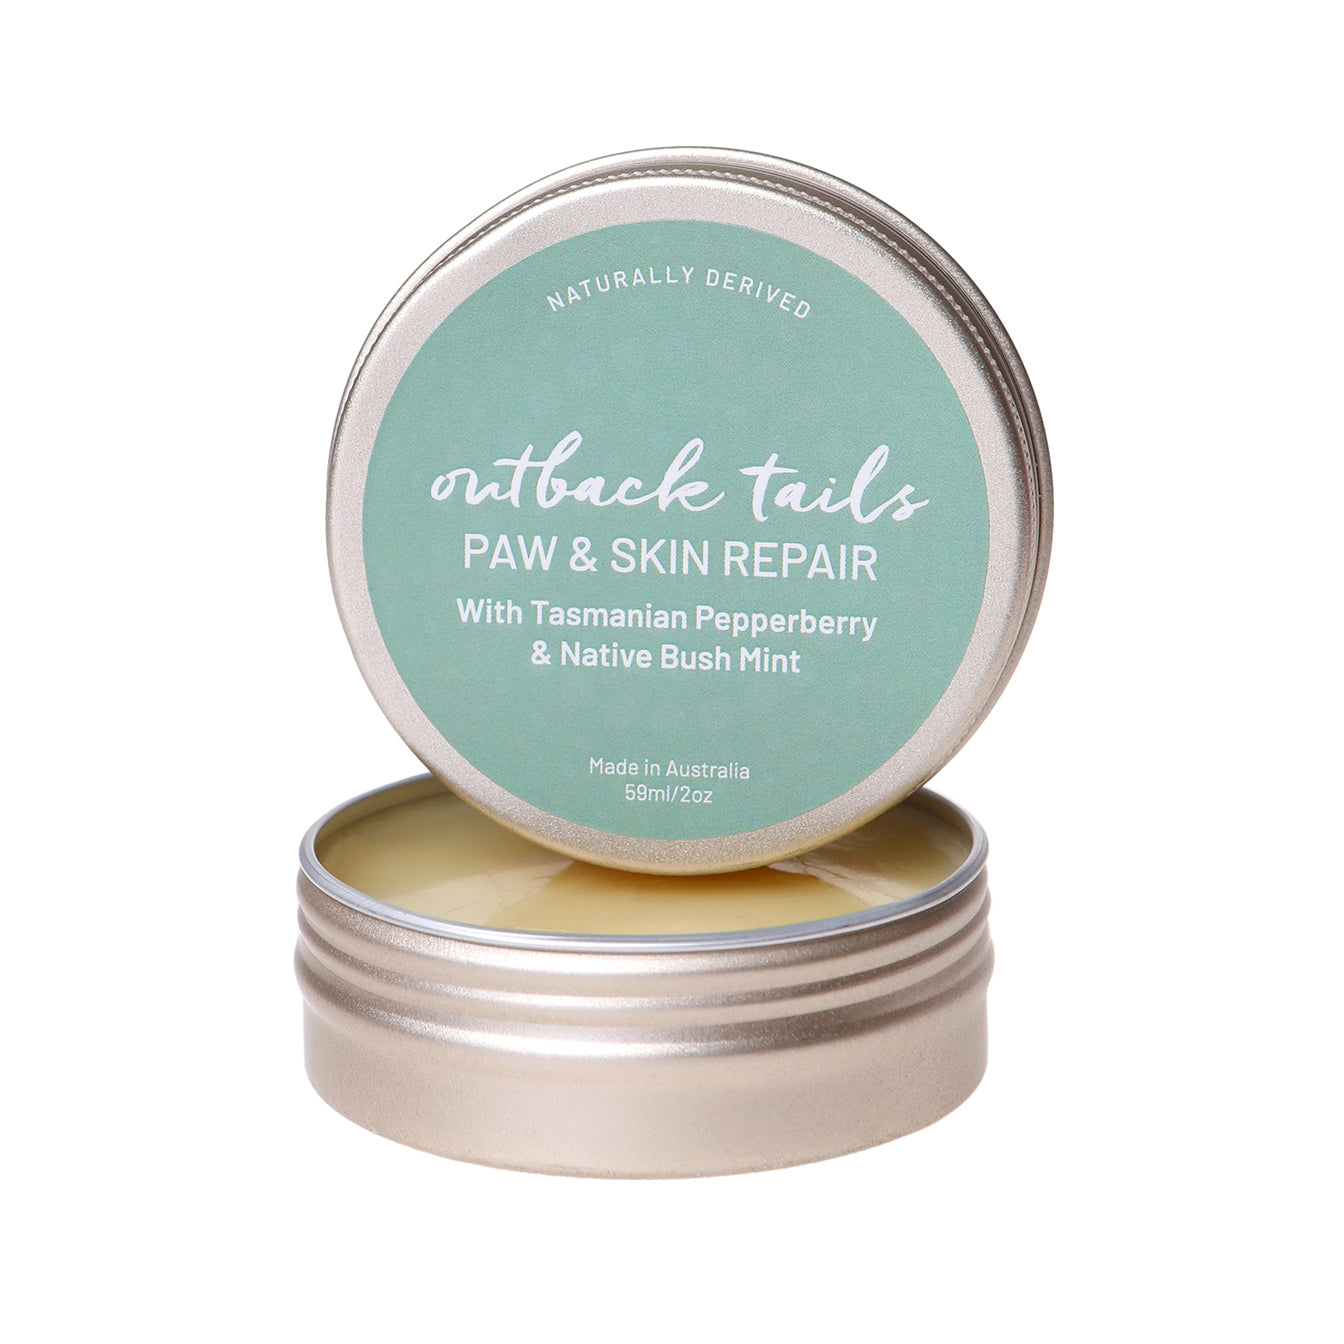 Outback Tails - Paw & Skin repair with Tasmanian Pepper Berry & Bush Mint